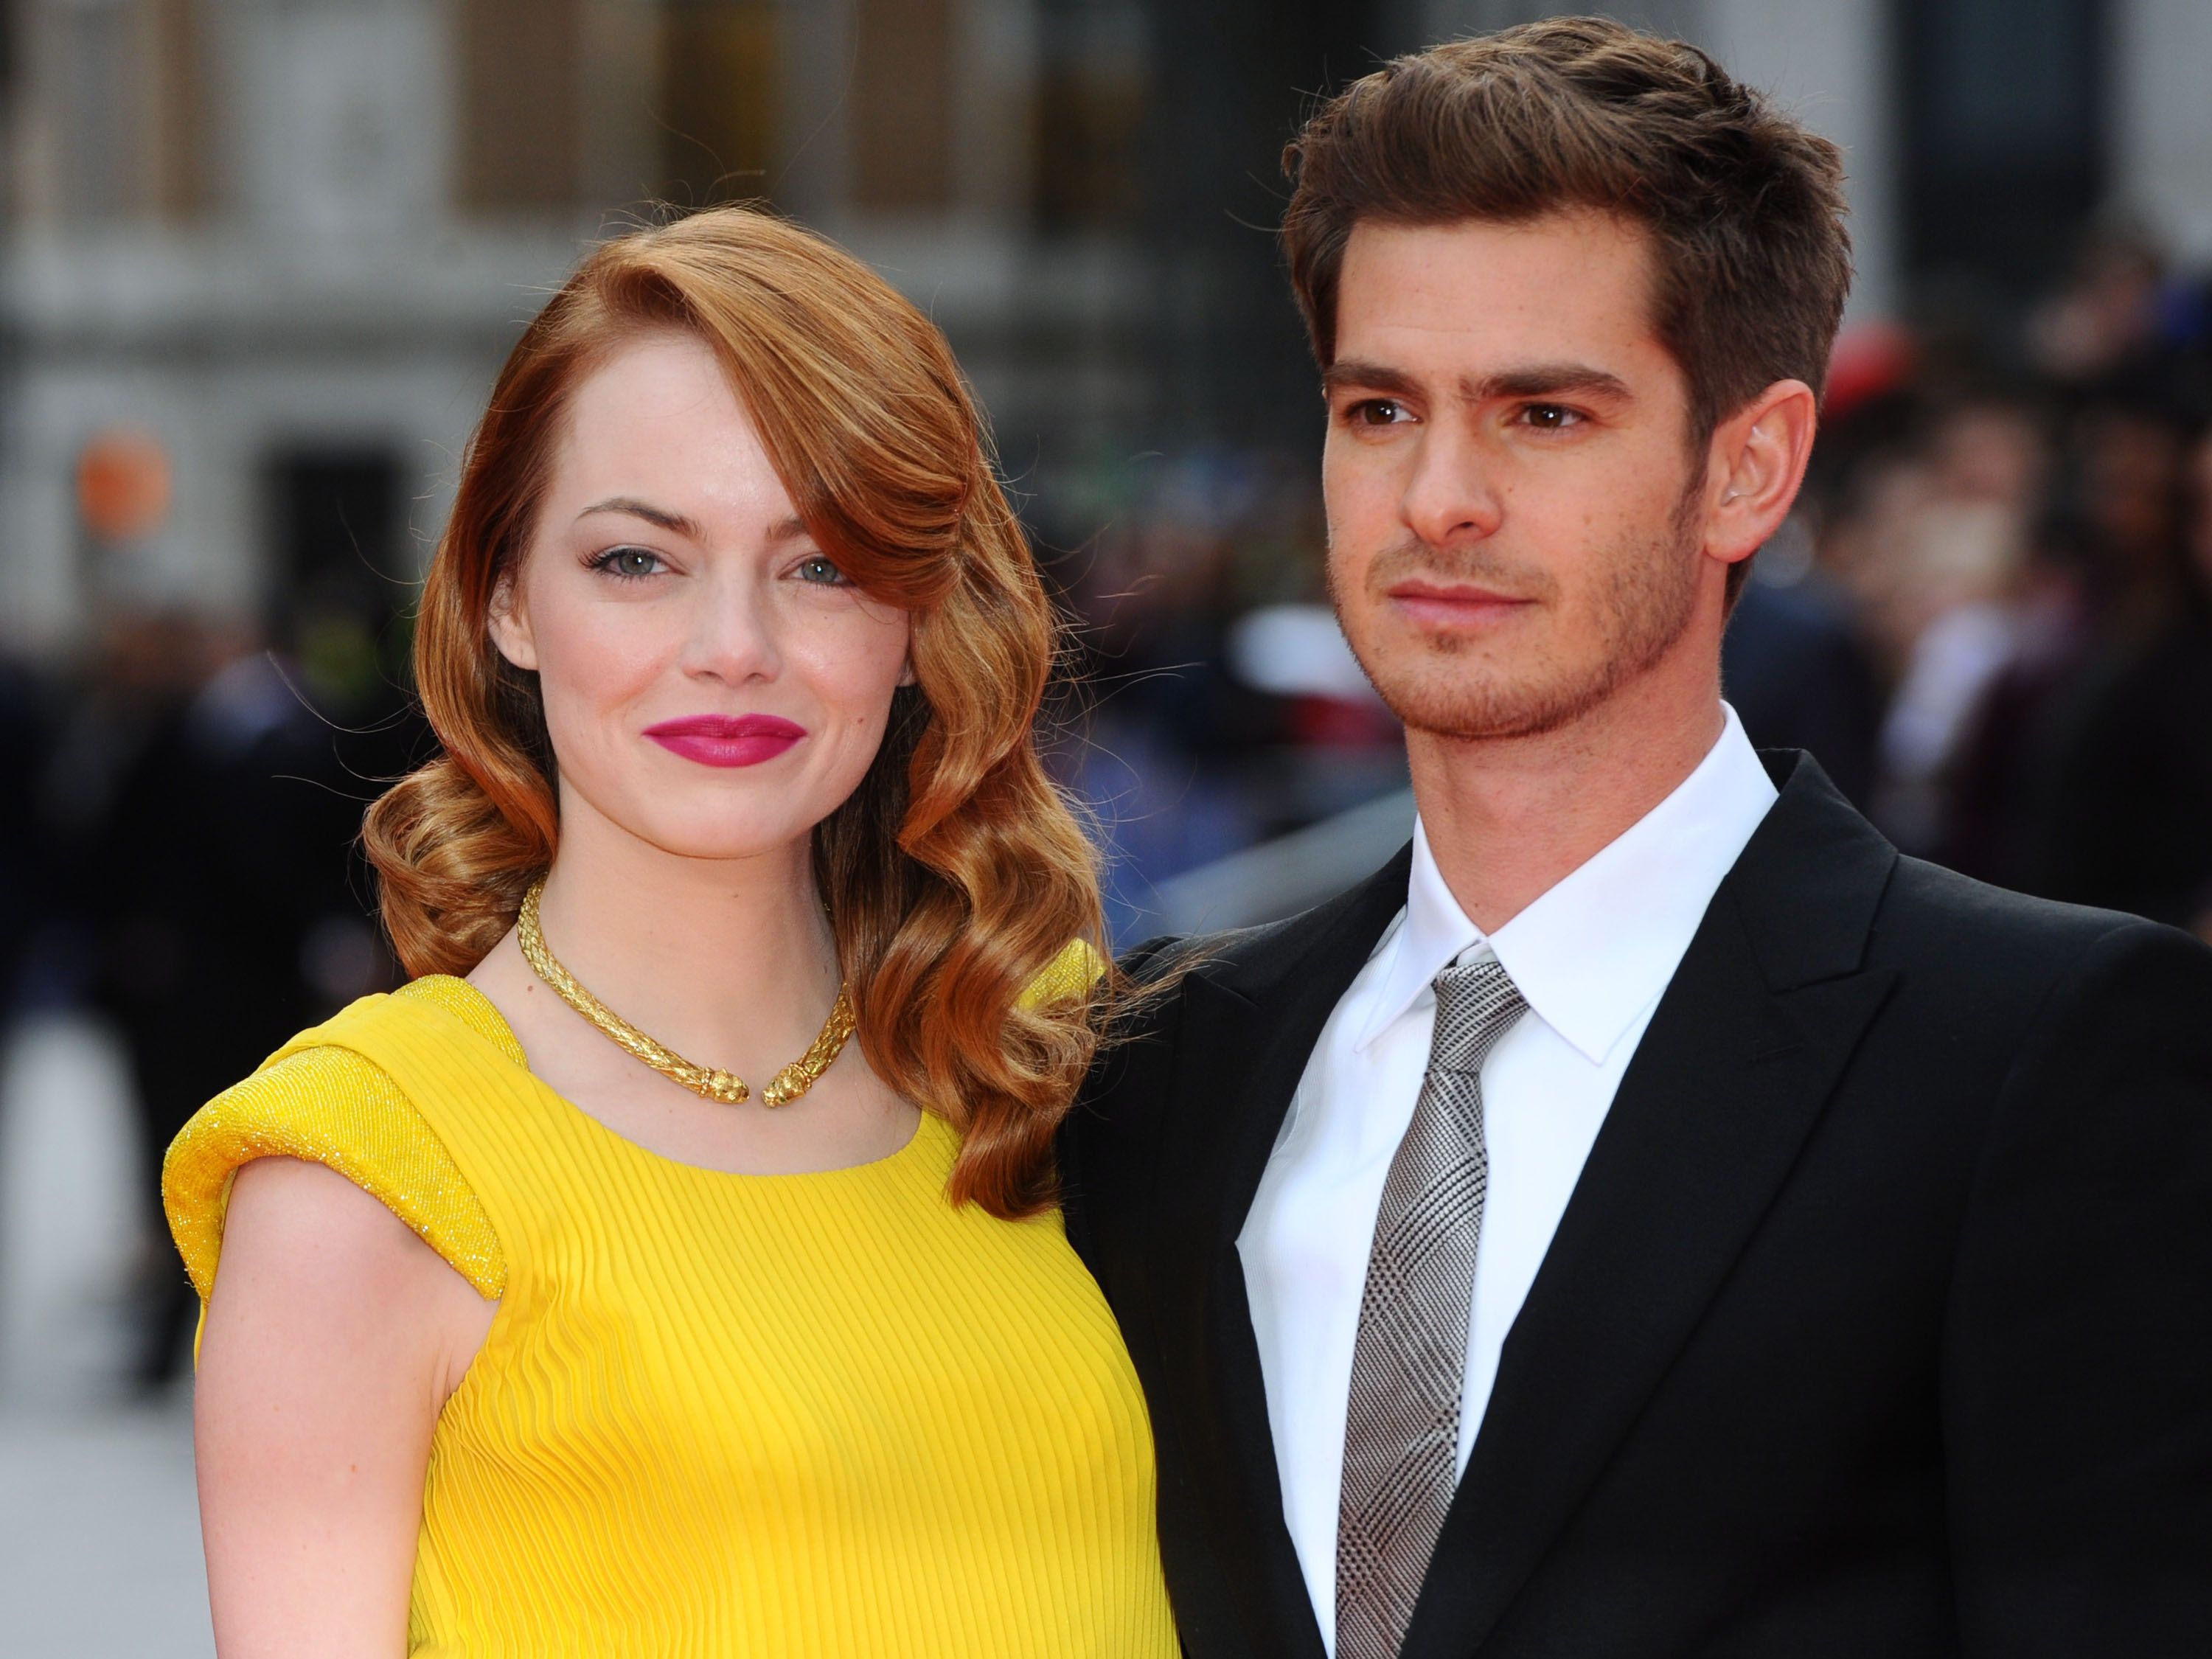 Emma Stone and Andrew Garfield Were Photographed Together Again